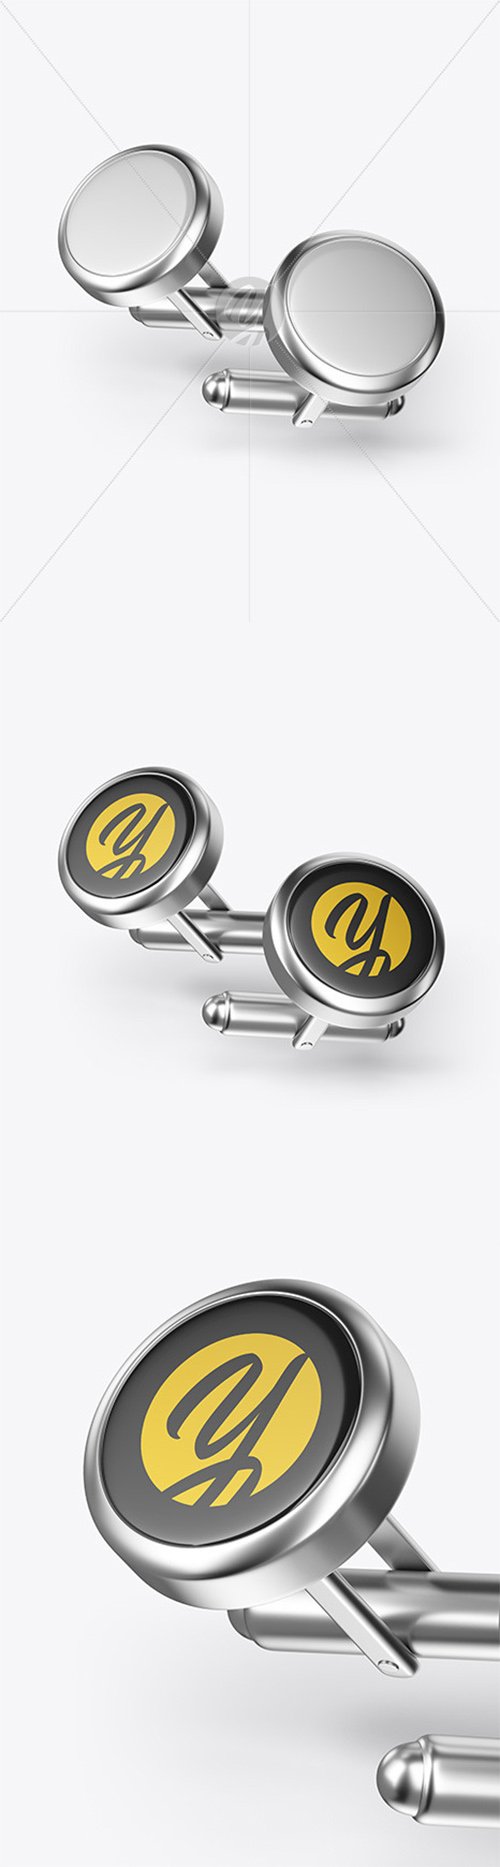 Two Cufflinks with Round Caps Mockup 63484